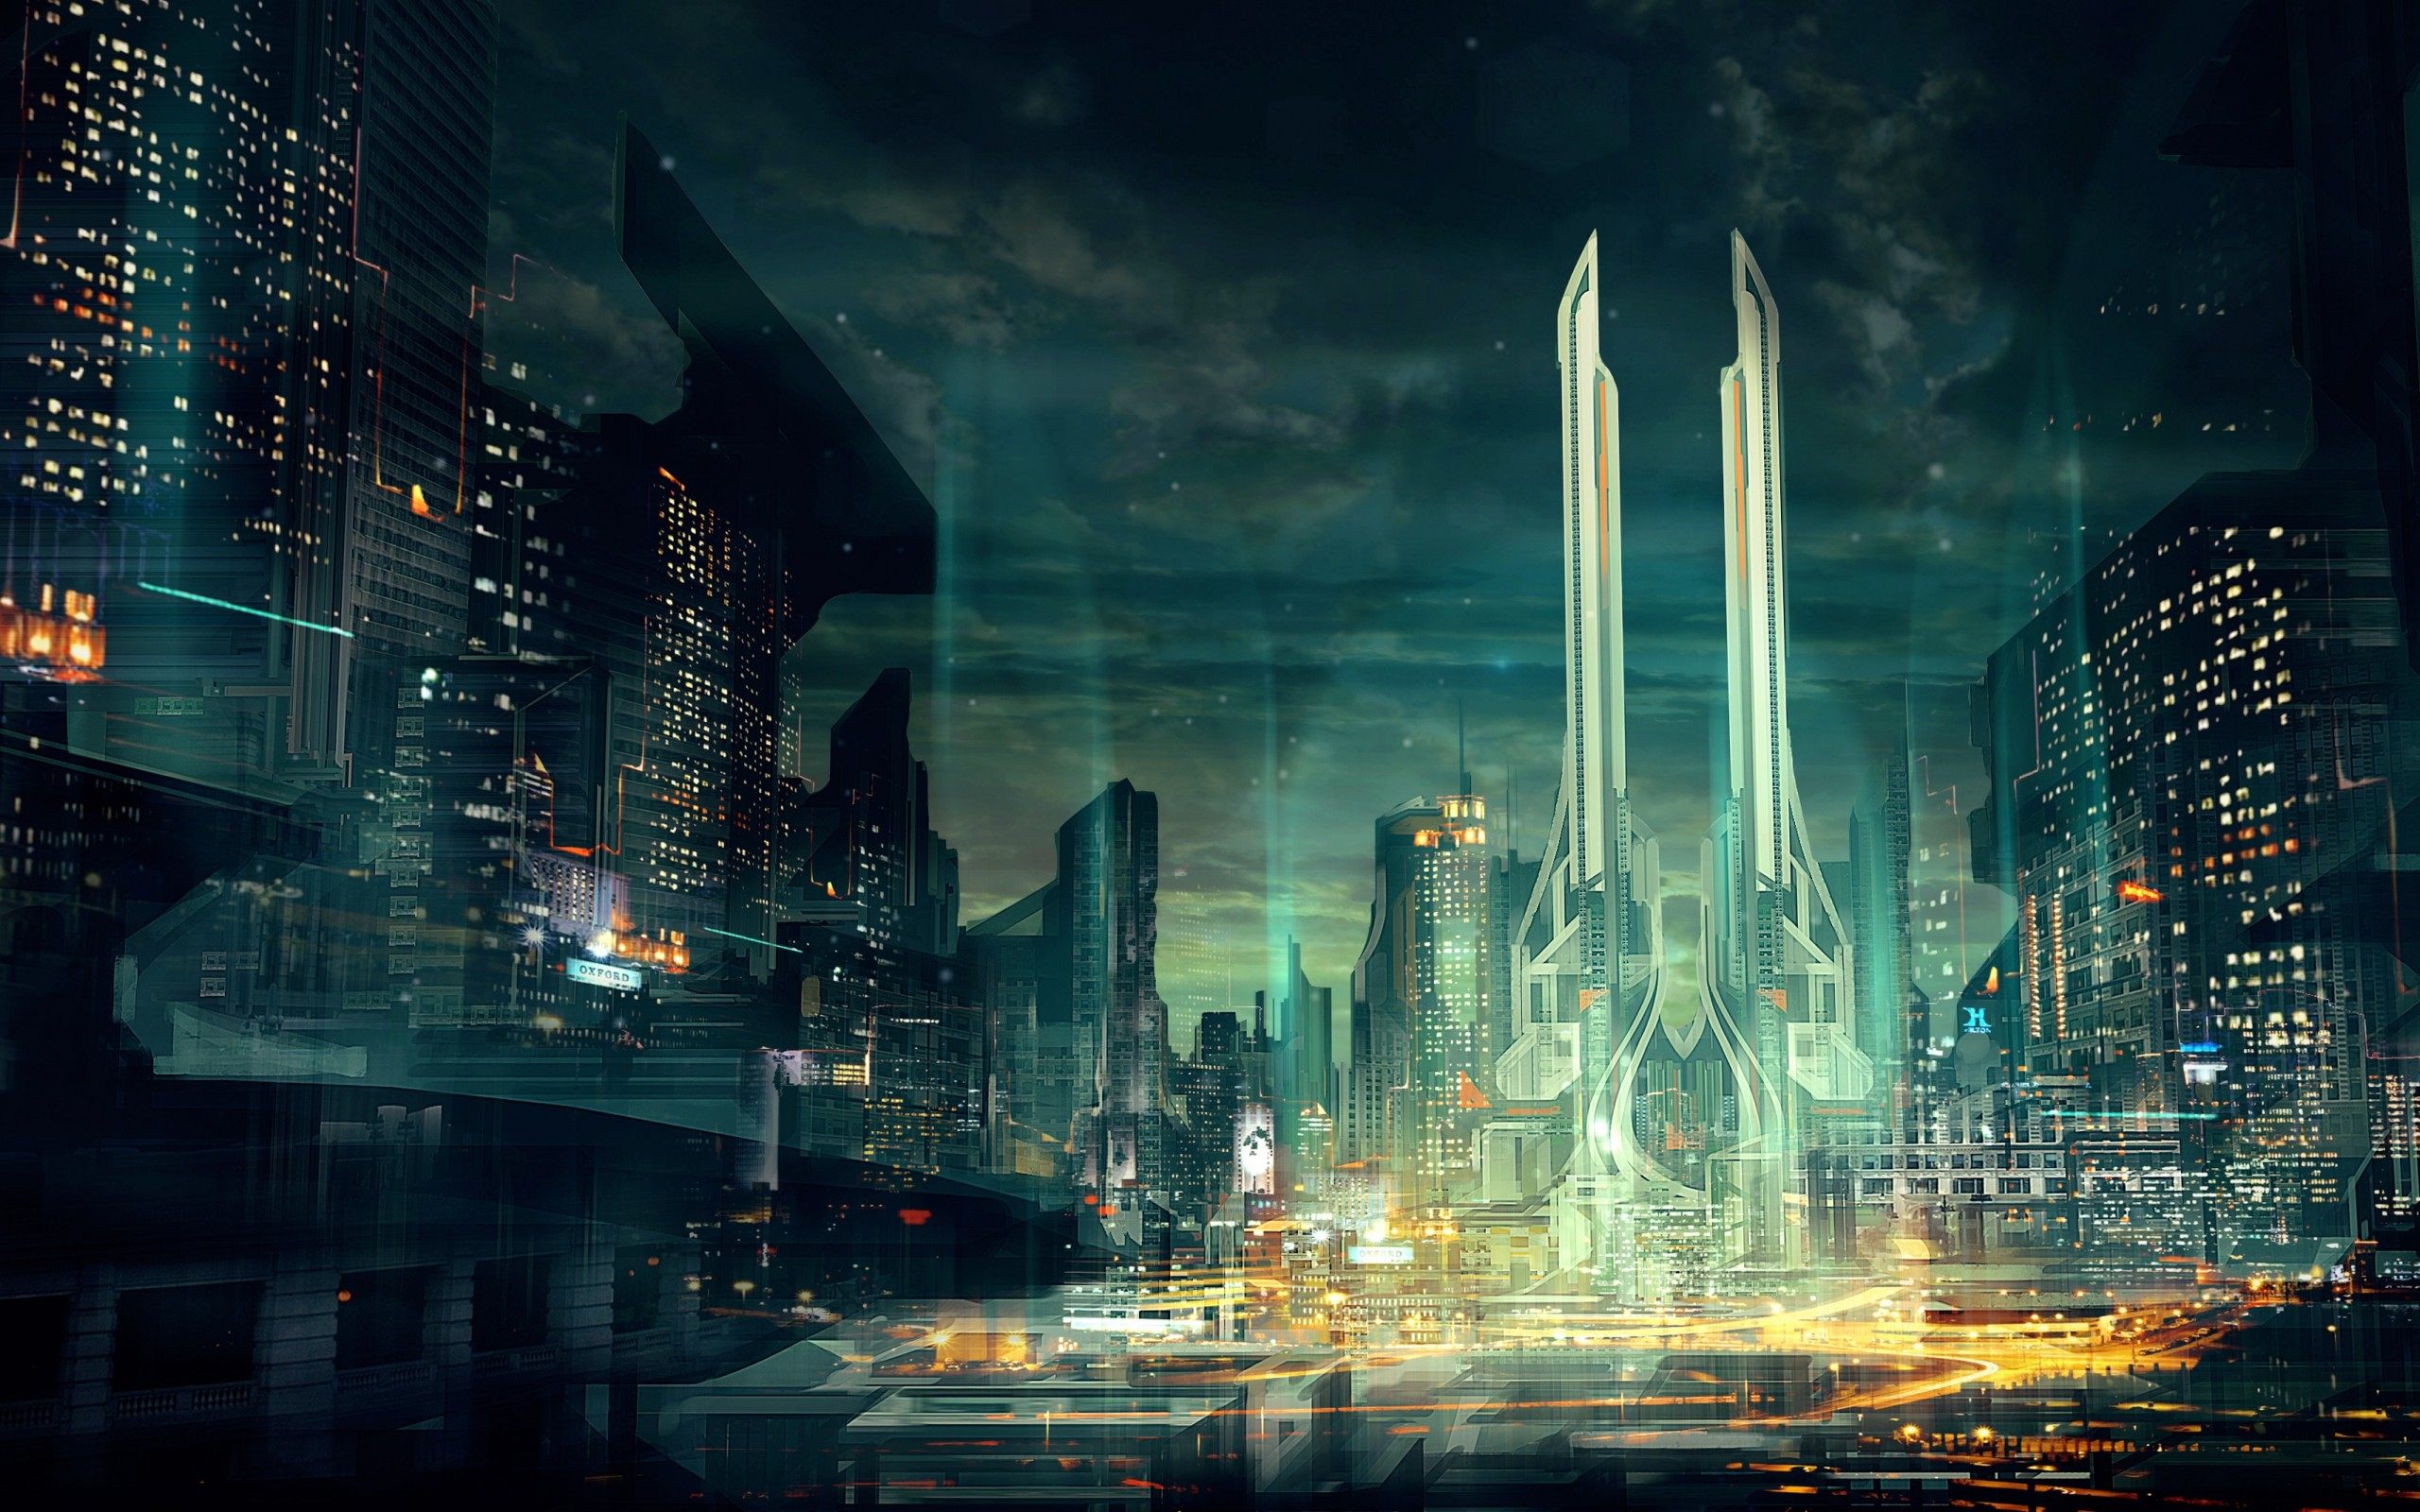 Sci Fi City Of Future Wallpaper HD For Desktop In High Quality